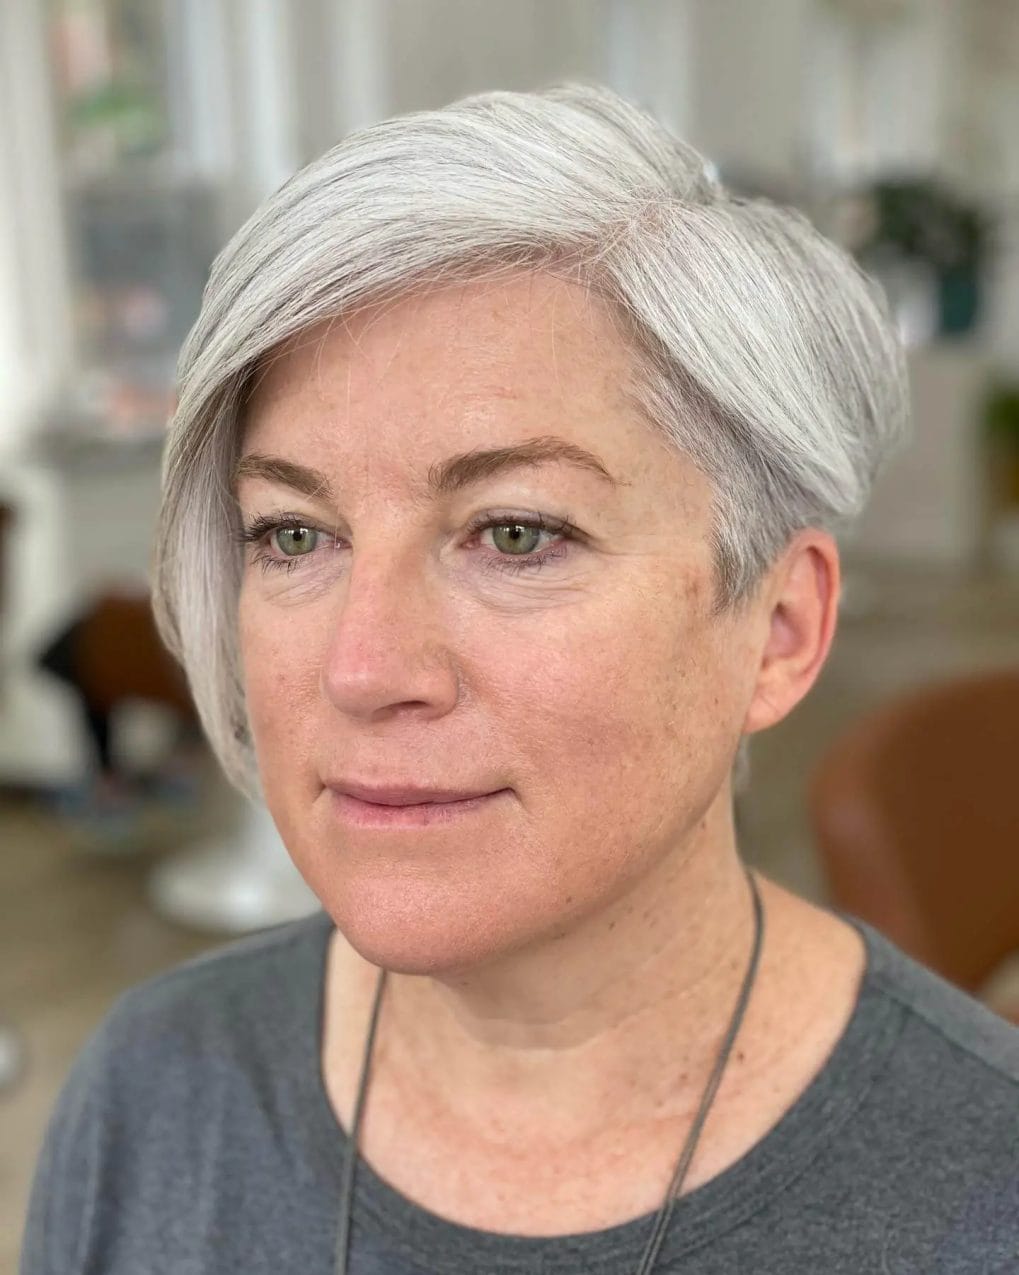 Sleek silver pixie with textured layers and side fringe.